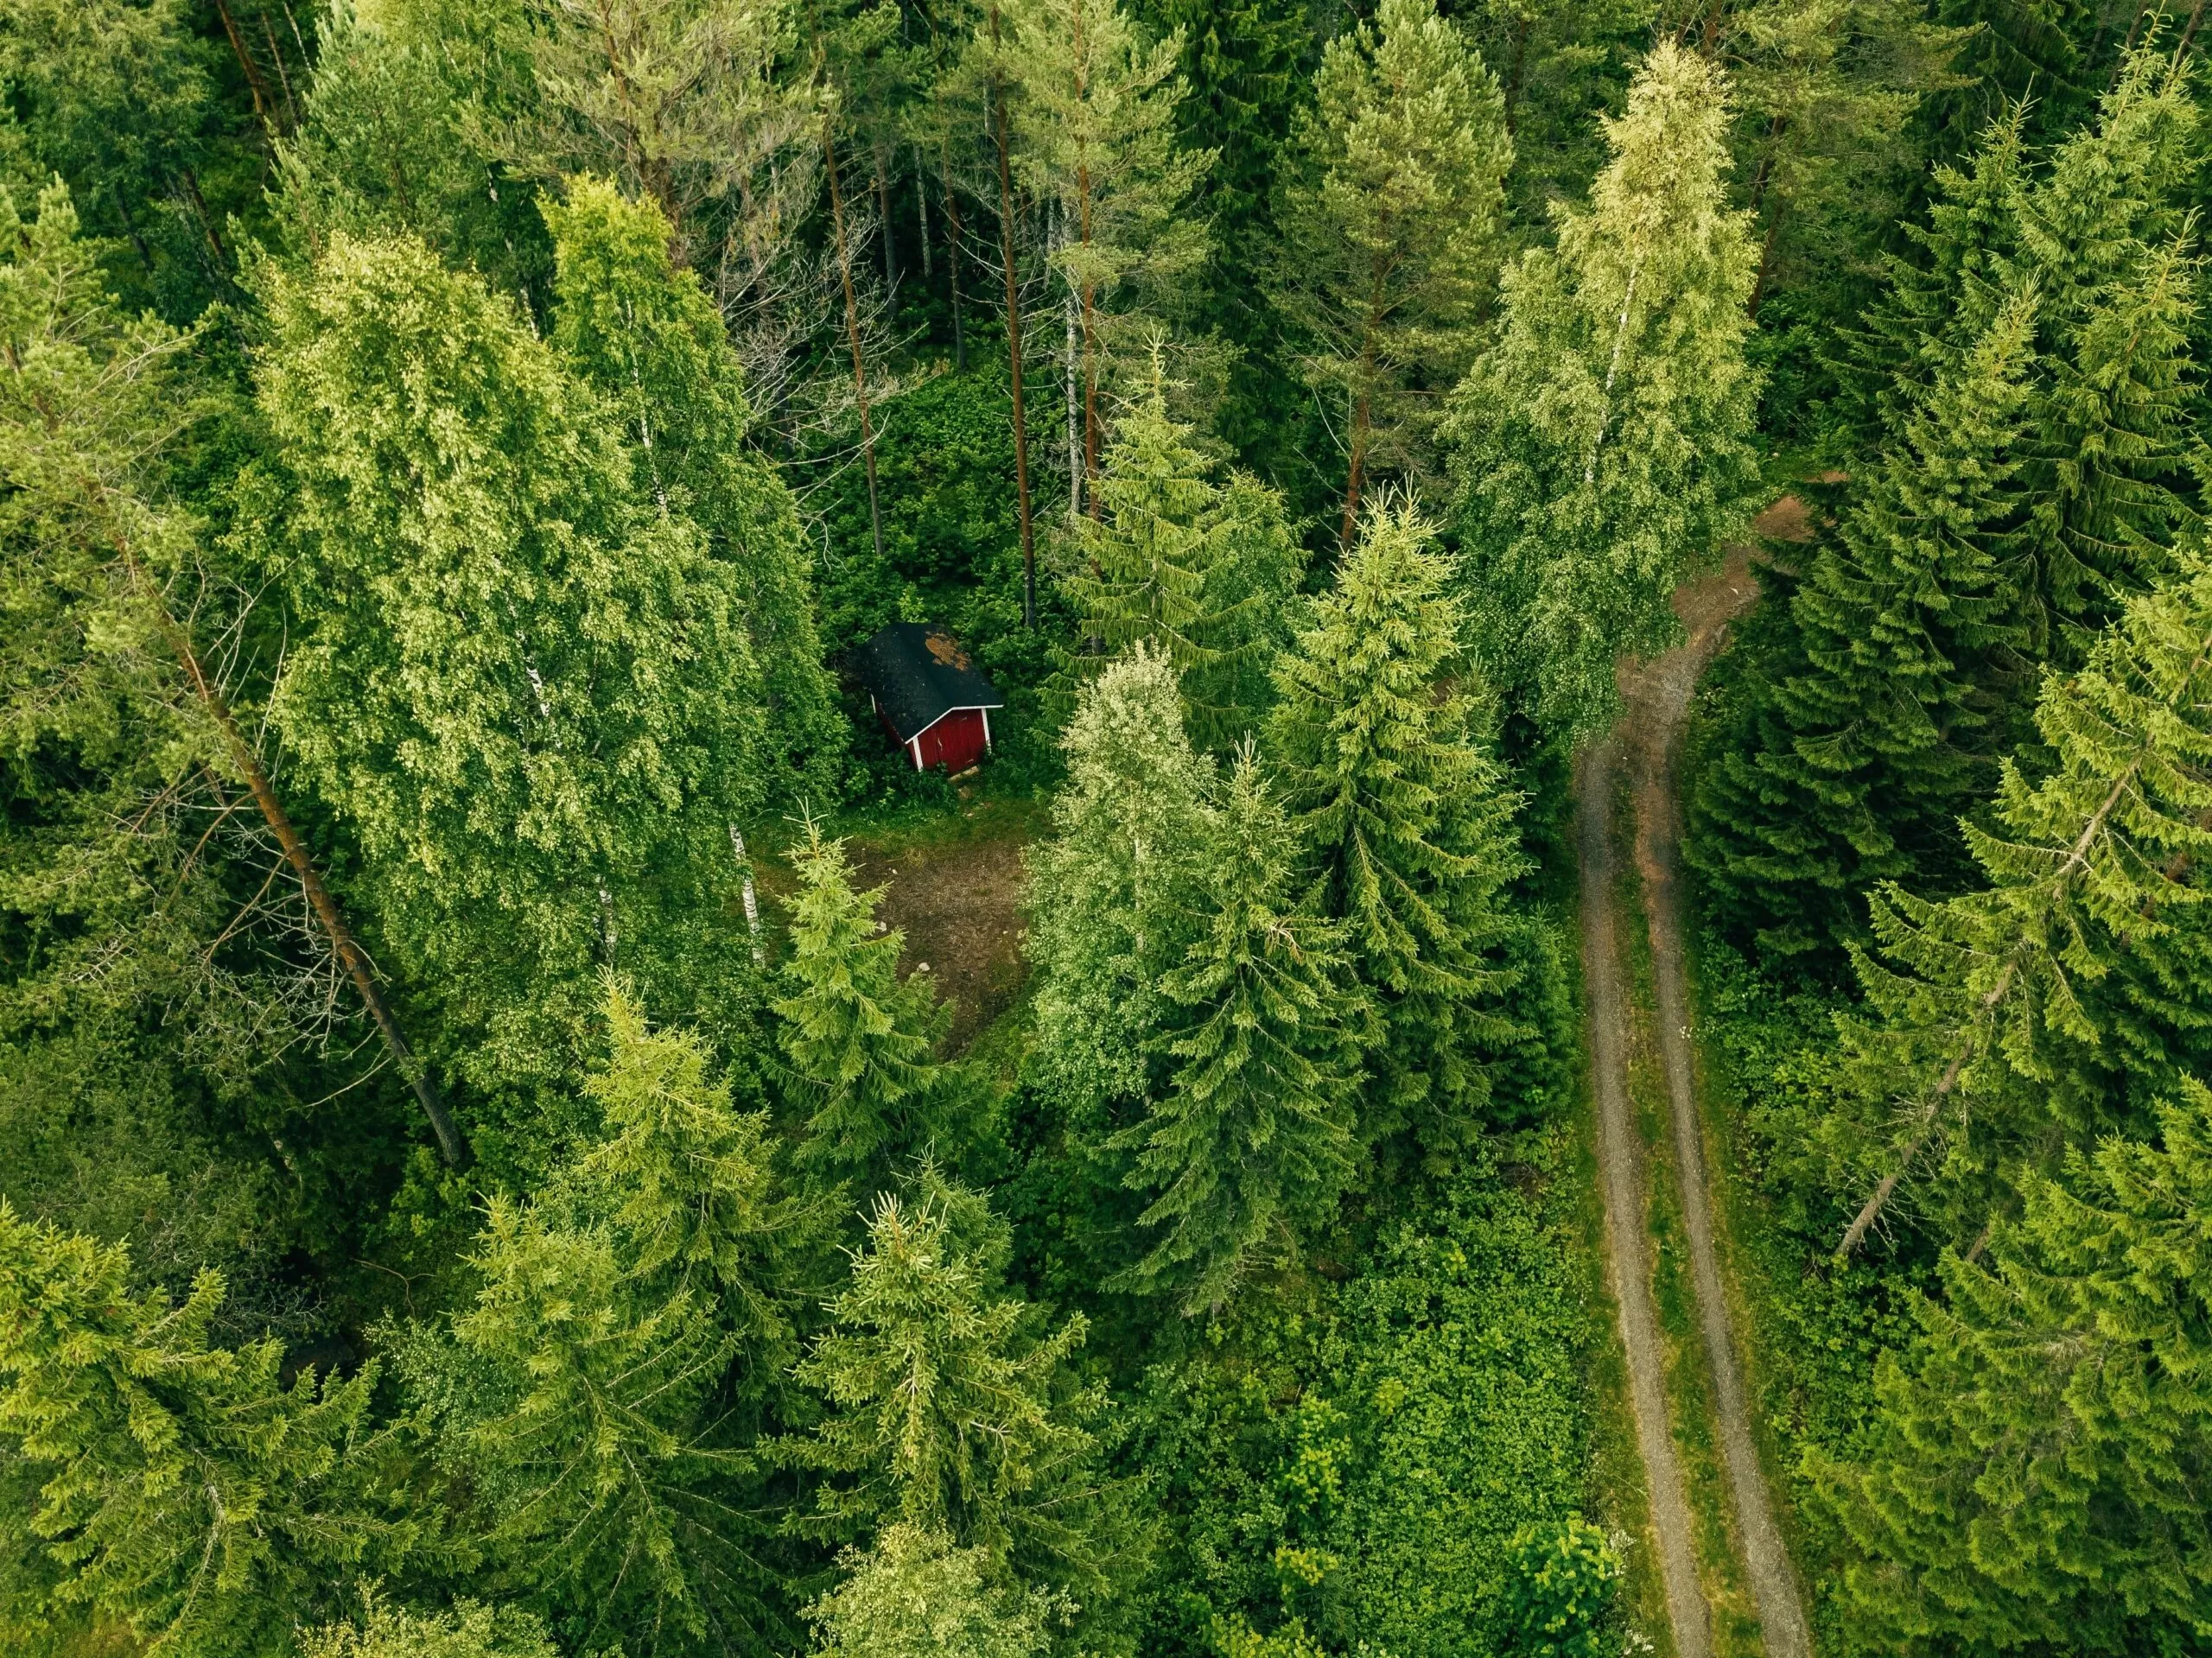 PLANTATION-aerial-view-of-the-road-through-the-spruce-forest-2022-02-01-23-40-56-utc-min-scaled.jpg